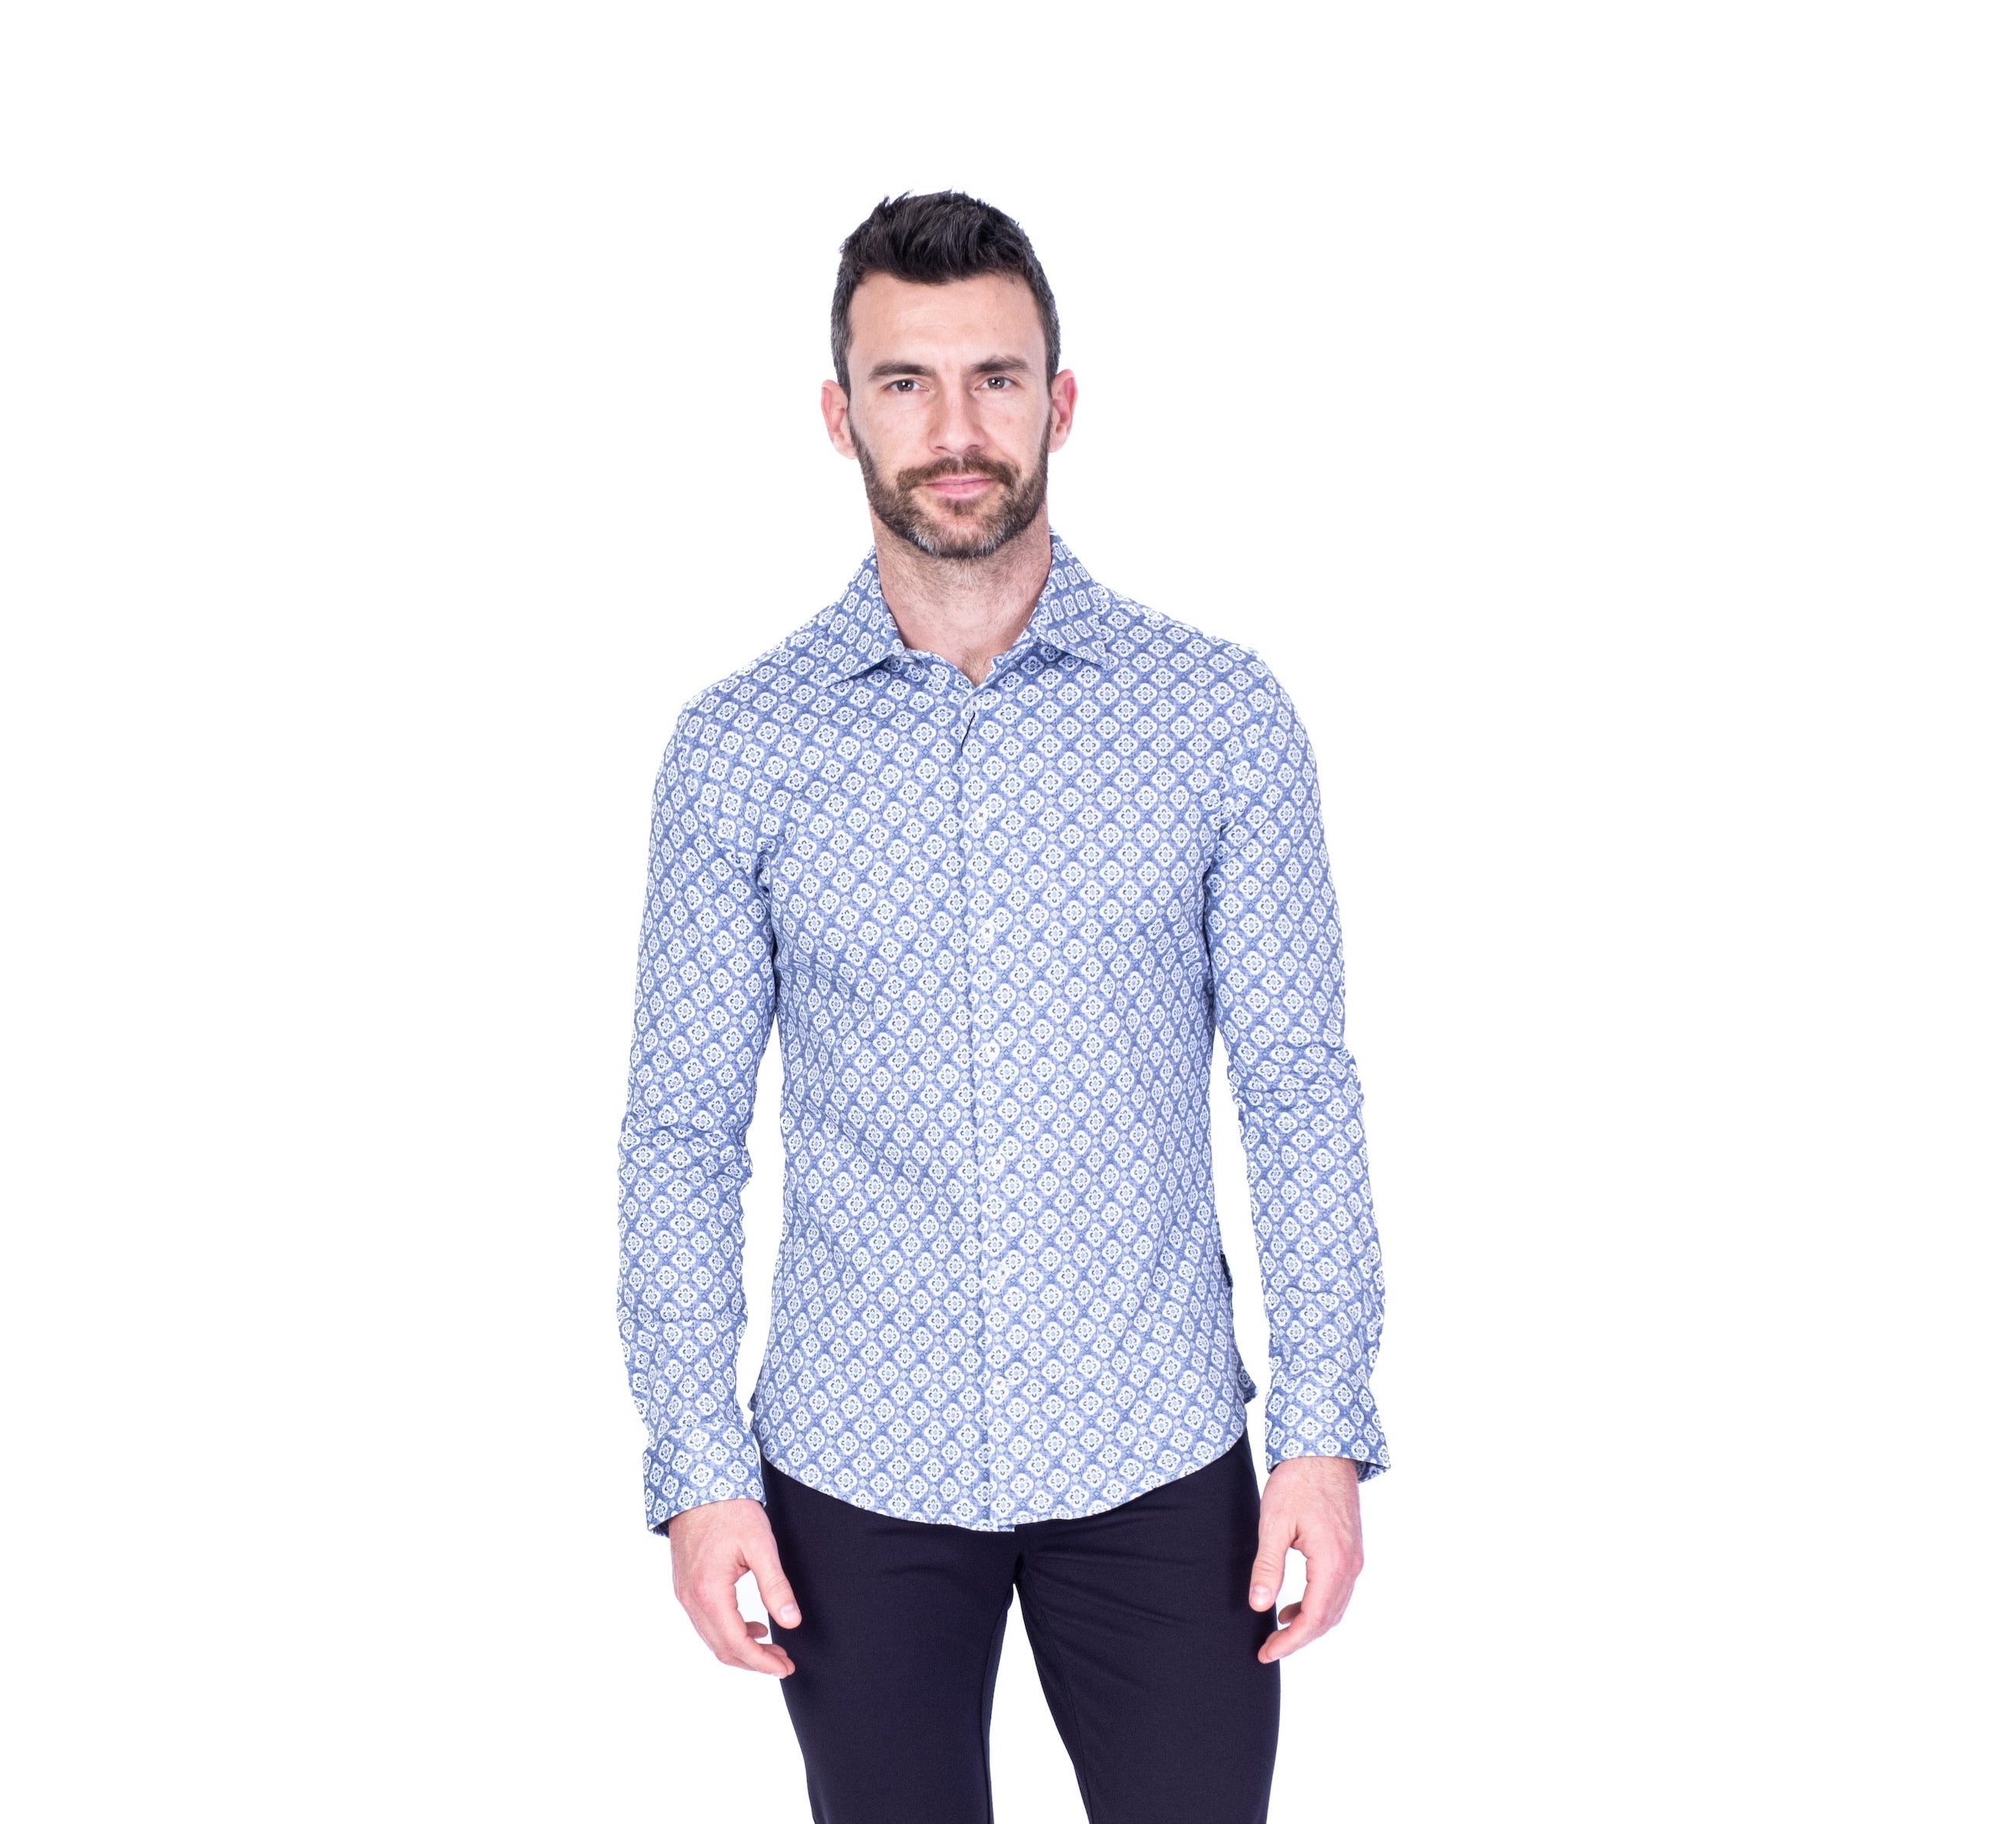 Floral Print Cotton Stretch Sport Shirt - Blue with White